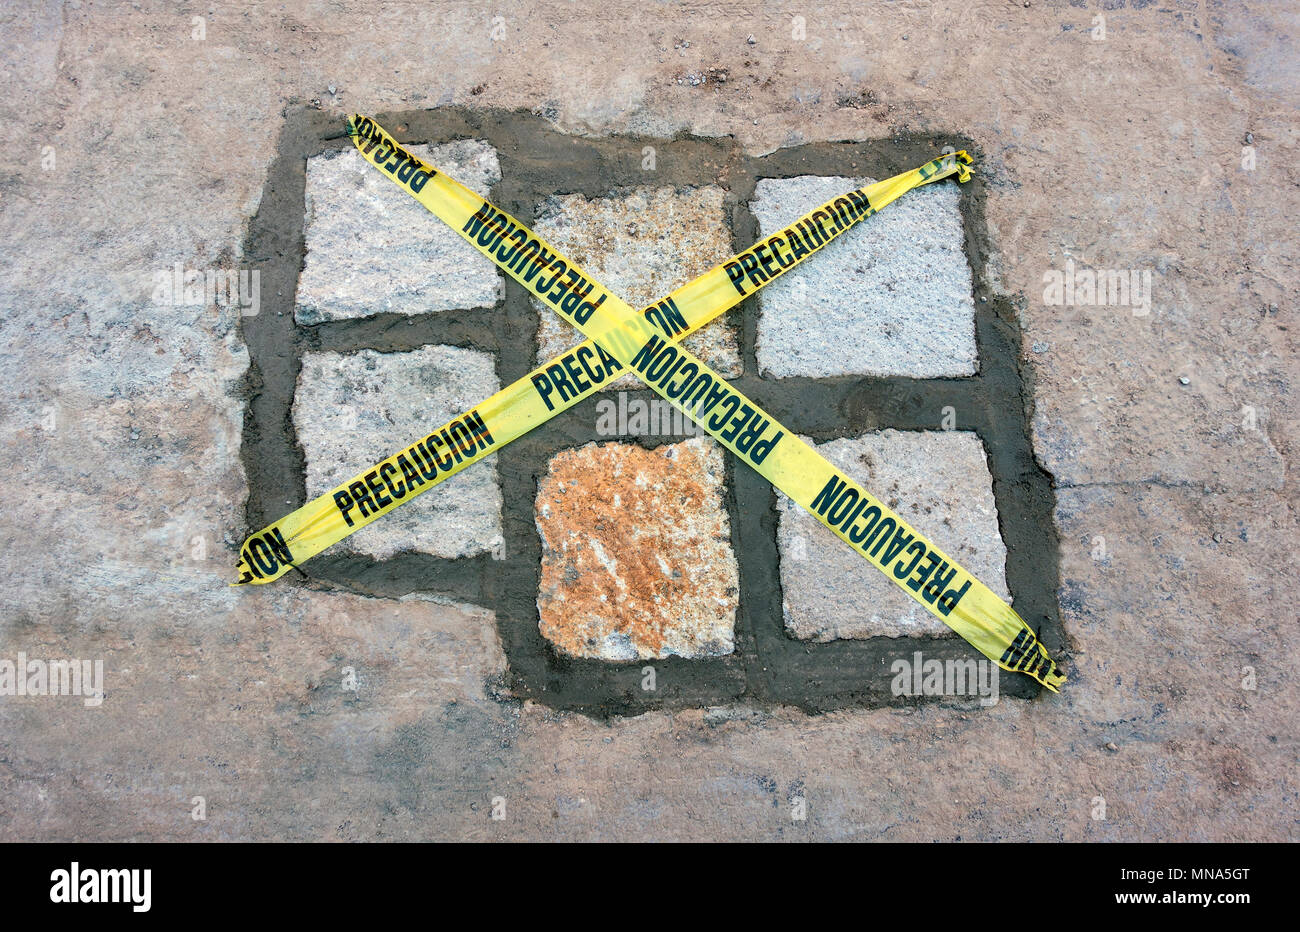 Replacement cobbles in a road in San Miguel de Allende, Mexico, with yellow warning strips Stock Photo